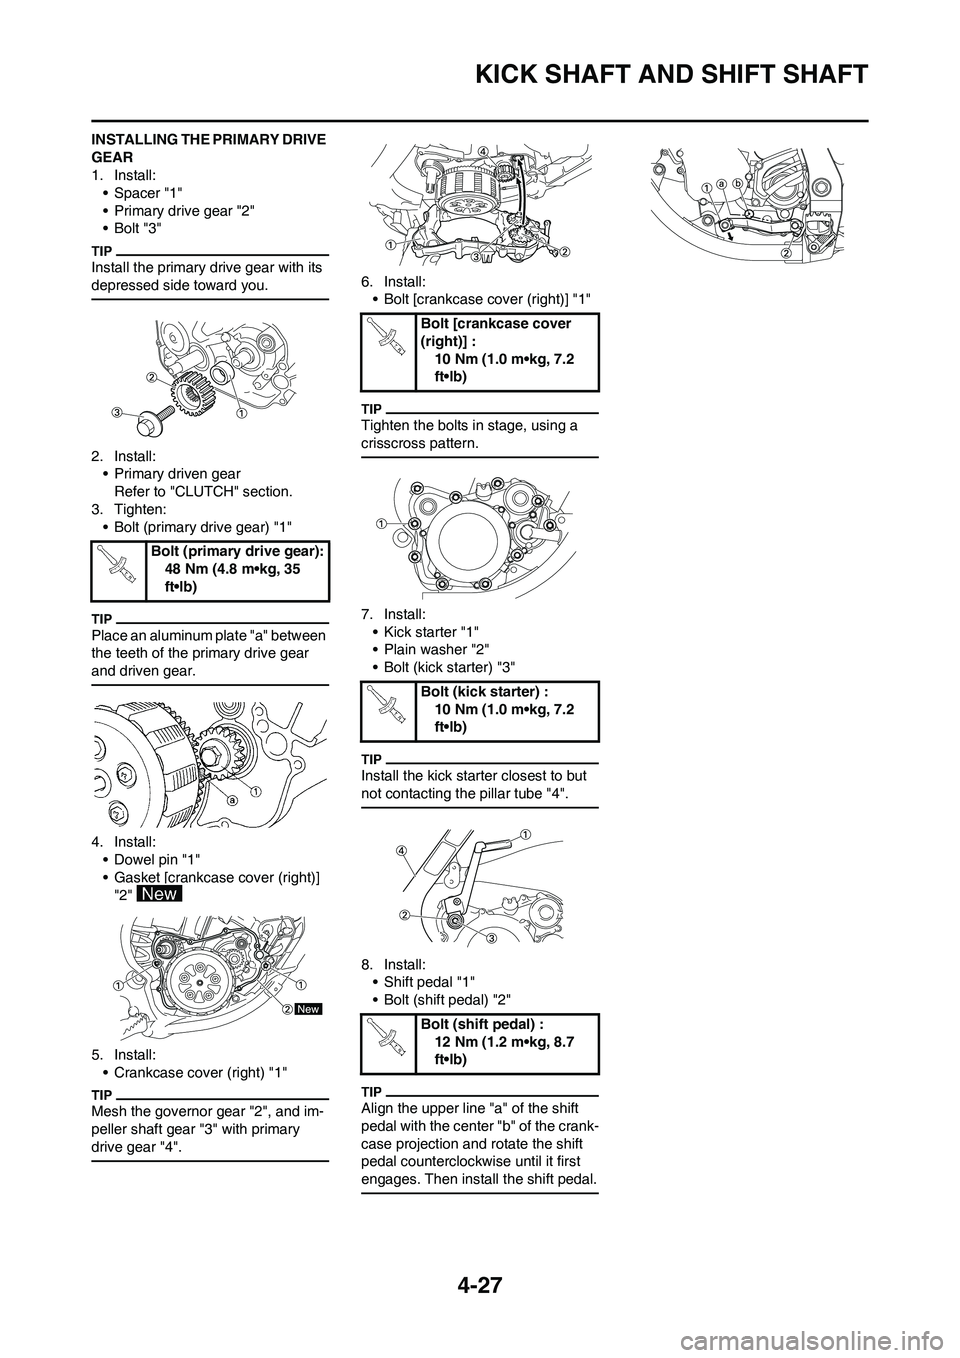 YAMAHA YZ125LC 2011  Owners Manual 4-27
KICK SHAFT AND SHIFT SHAFT
INSTALLING THE PRIMARY DRIVE 
GEAR
1. Install:
• Spacer "1"
• Primary drive gear "2"
•Bolt "3"
Install the primary drive gear with its 
depressed side toward you.